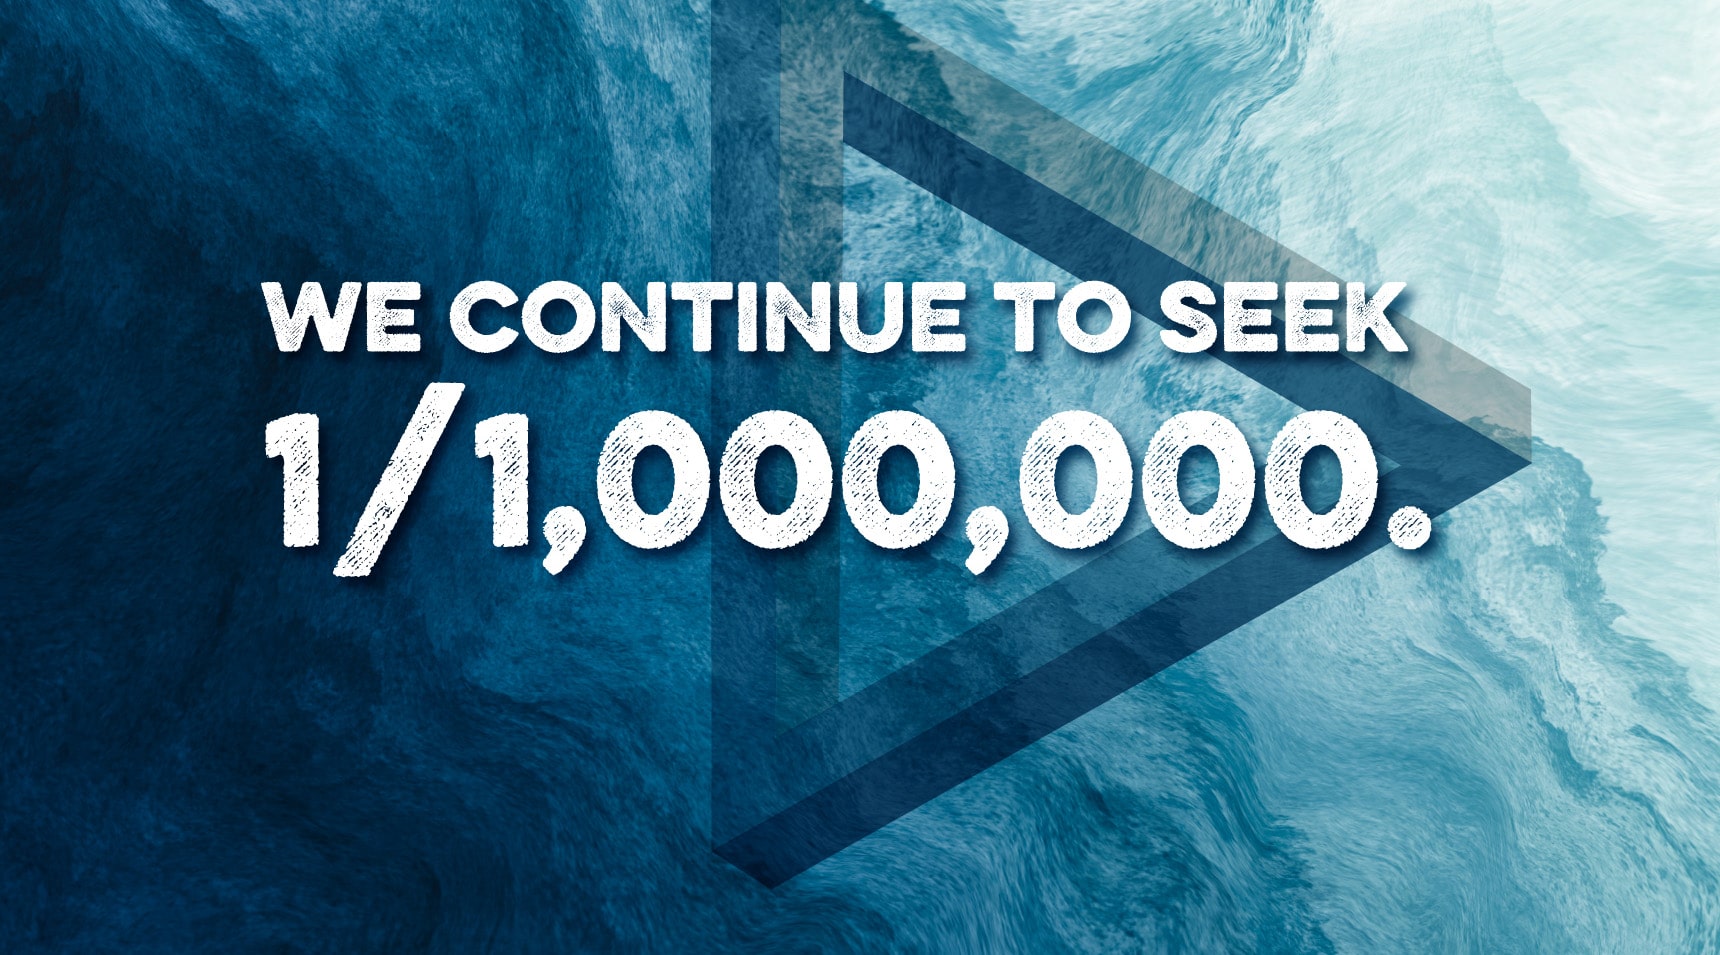 We continue to seek 1/1,000,000.